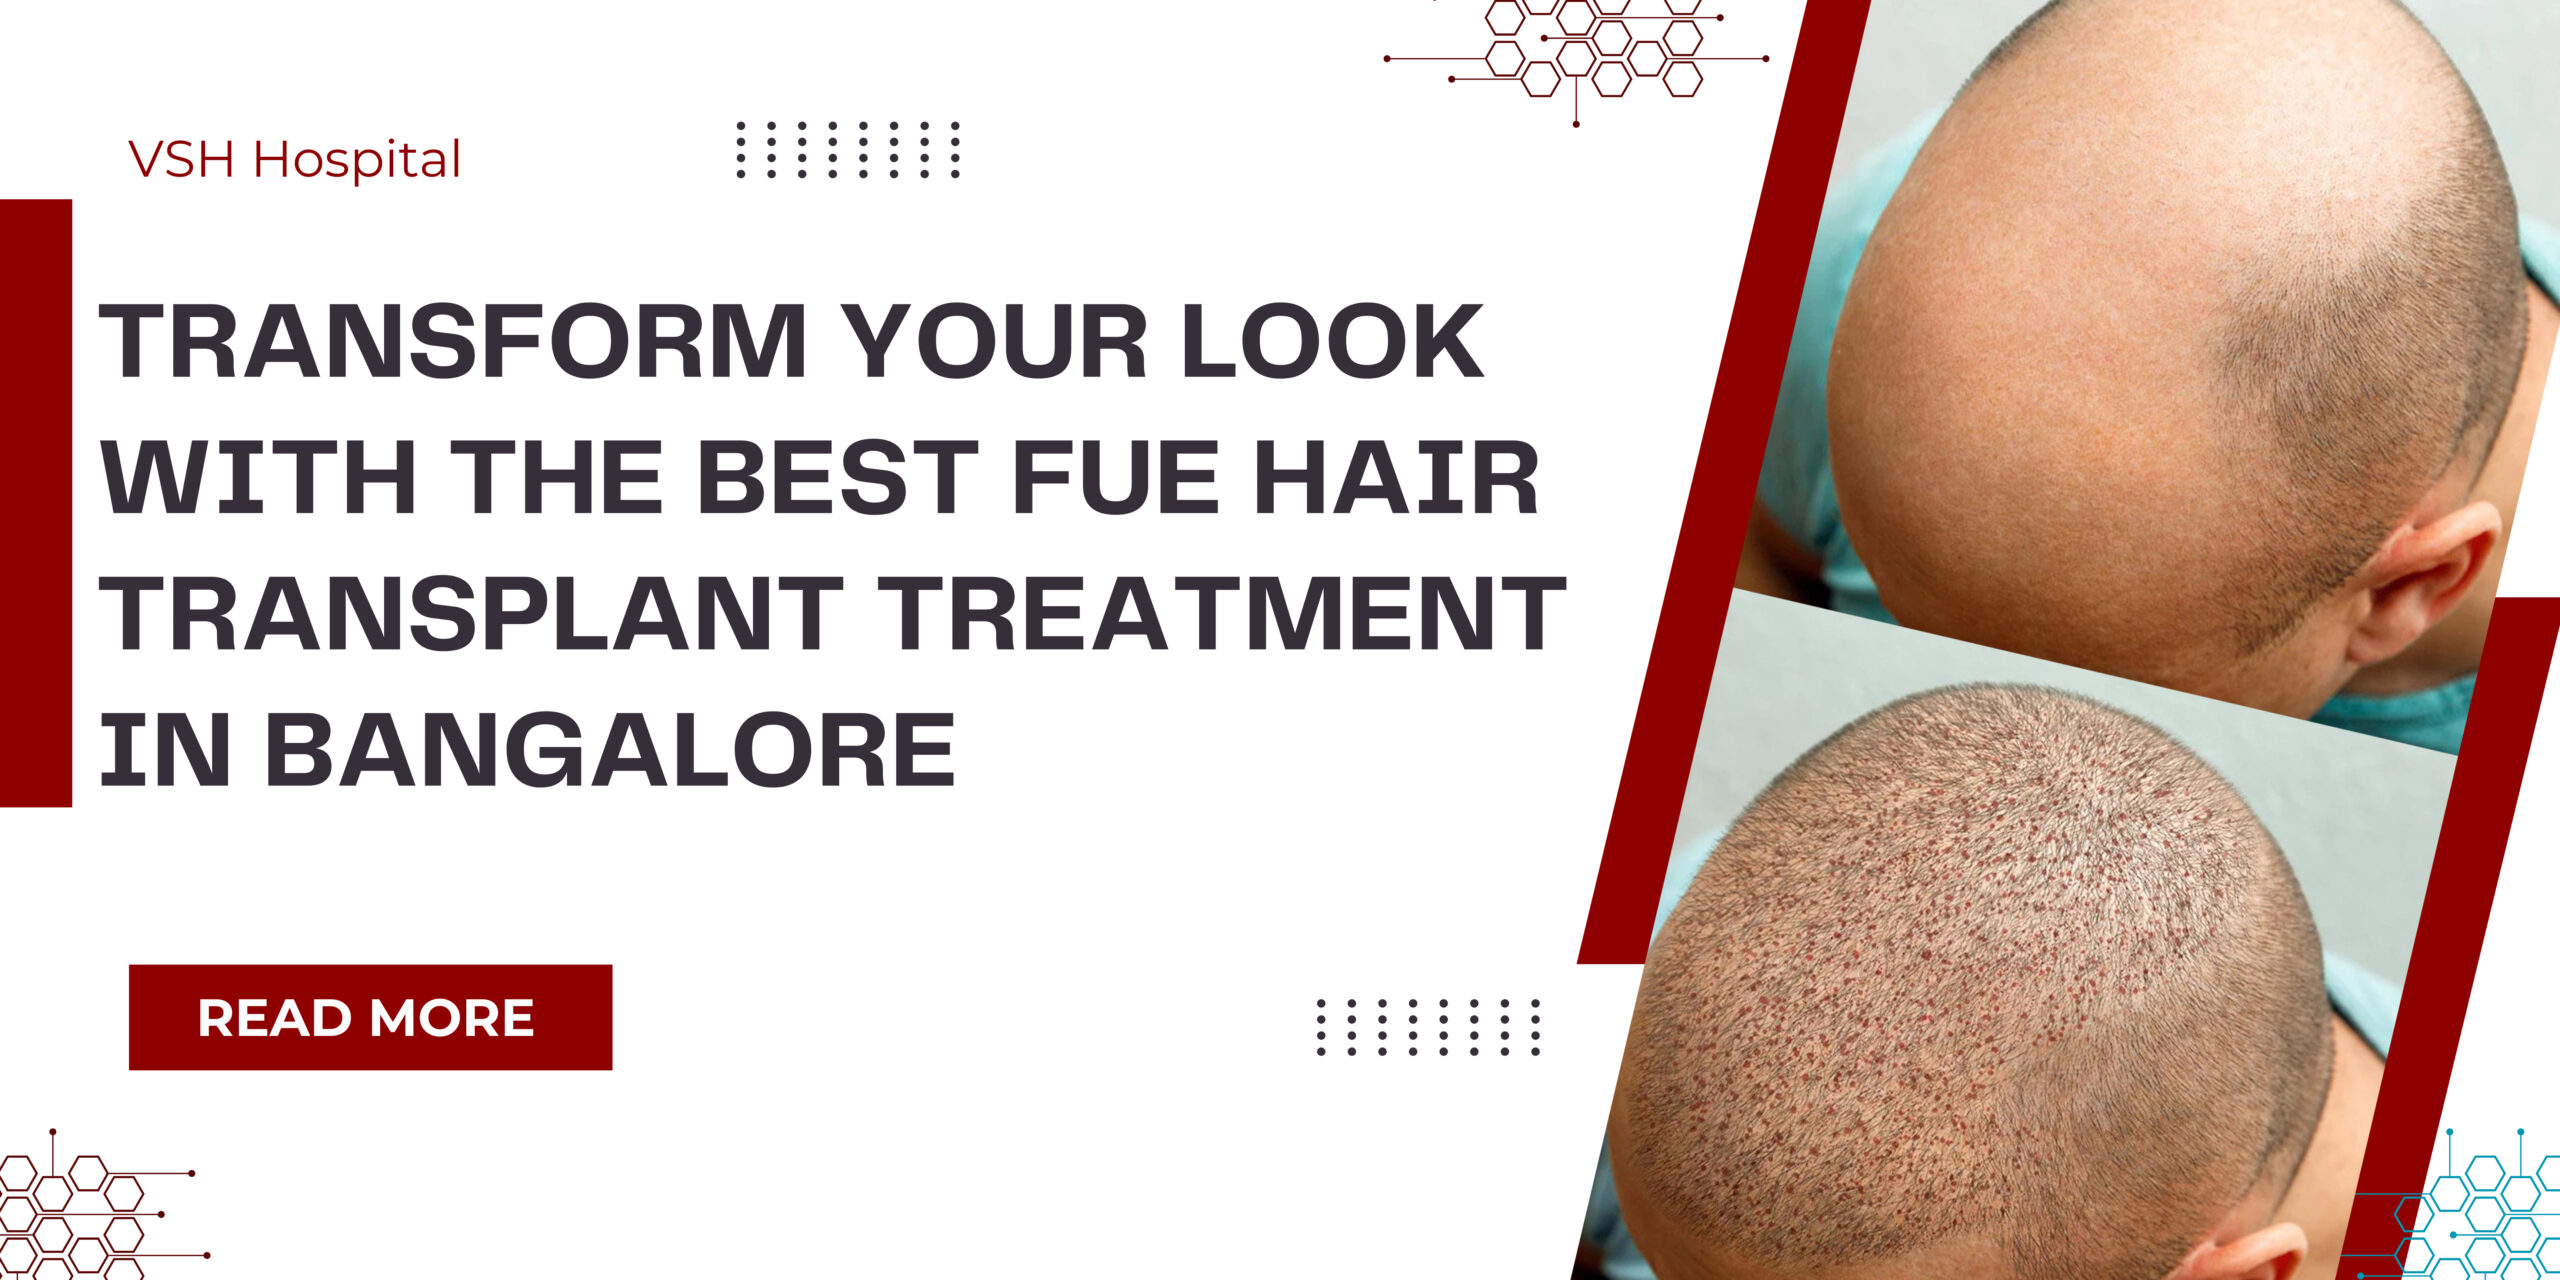 Transform Your Look with the Best FUE Hair Transplant Treatment in Bangalore